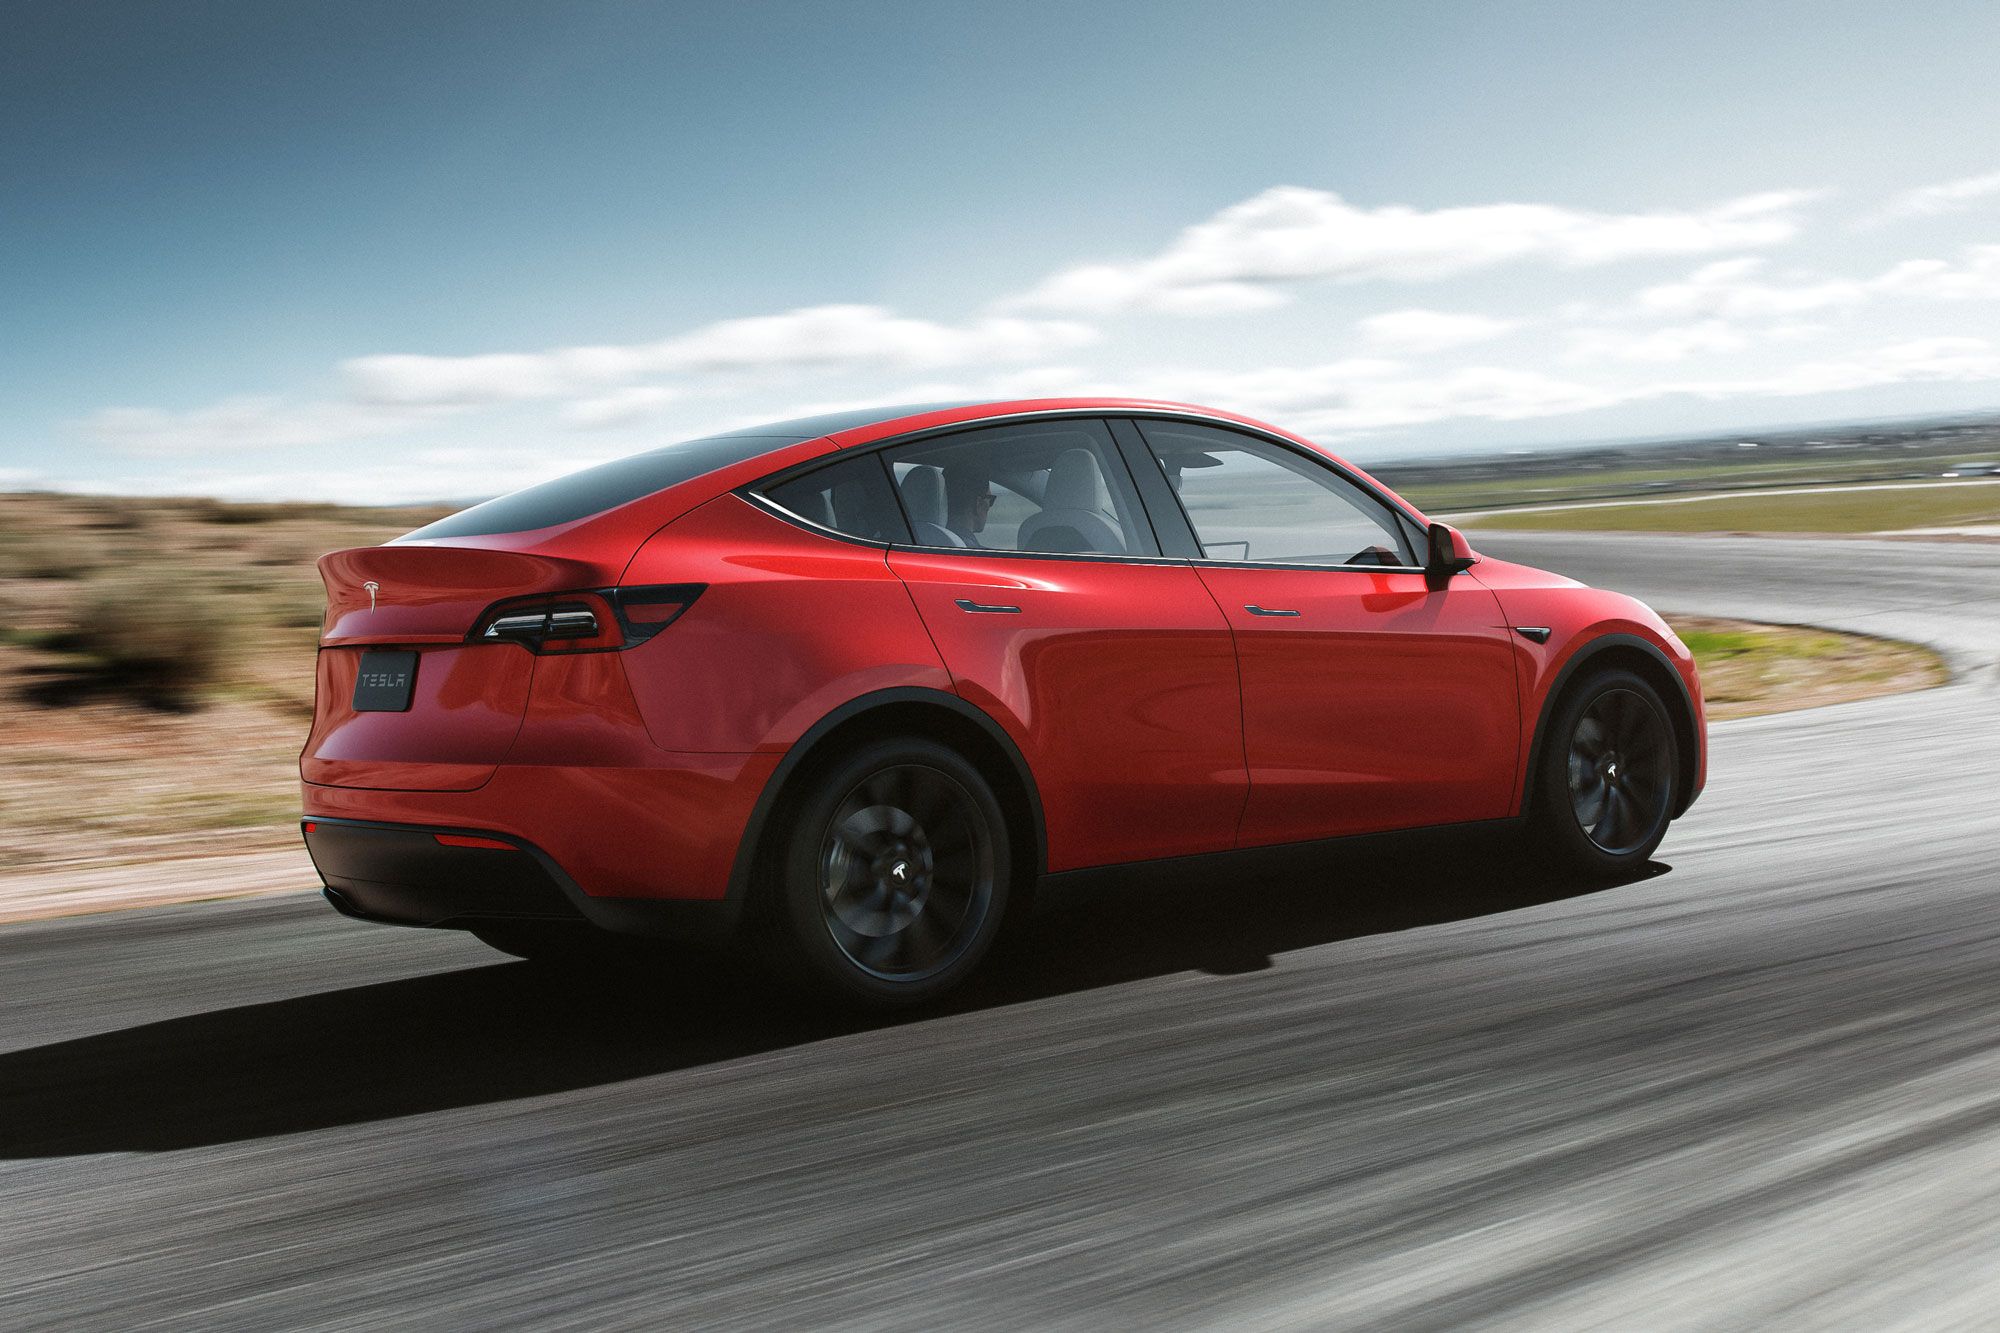 Tesla's Long Awaited Model Y Electric SUV Arrives Next Year, But You'll Have To Wait For The $000 Version